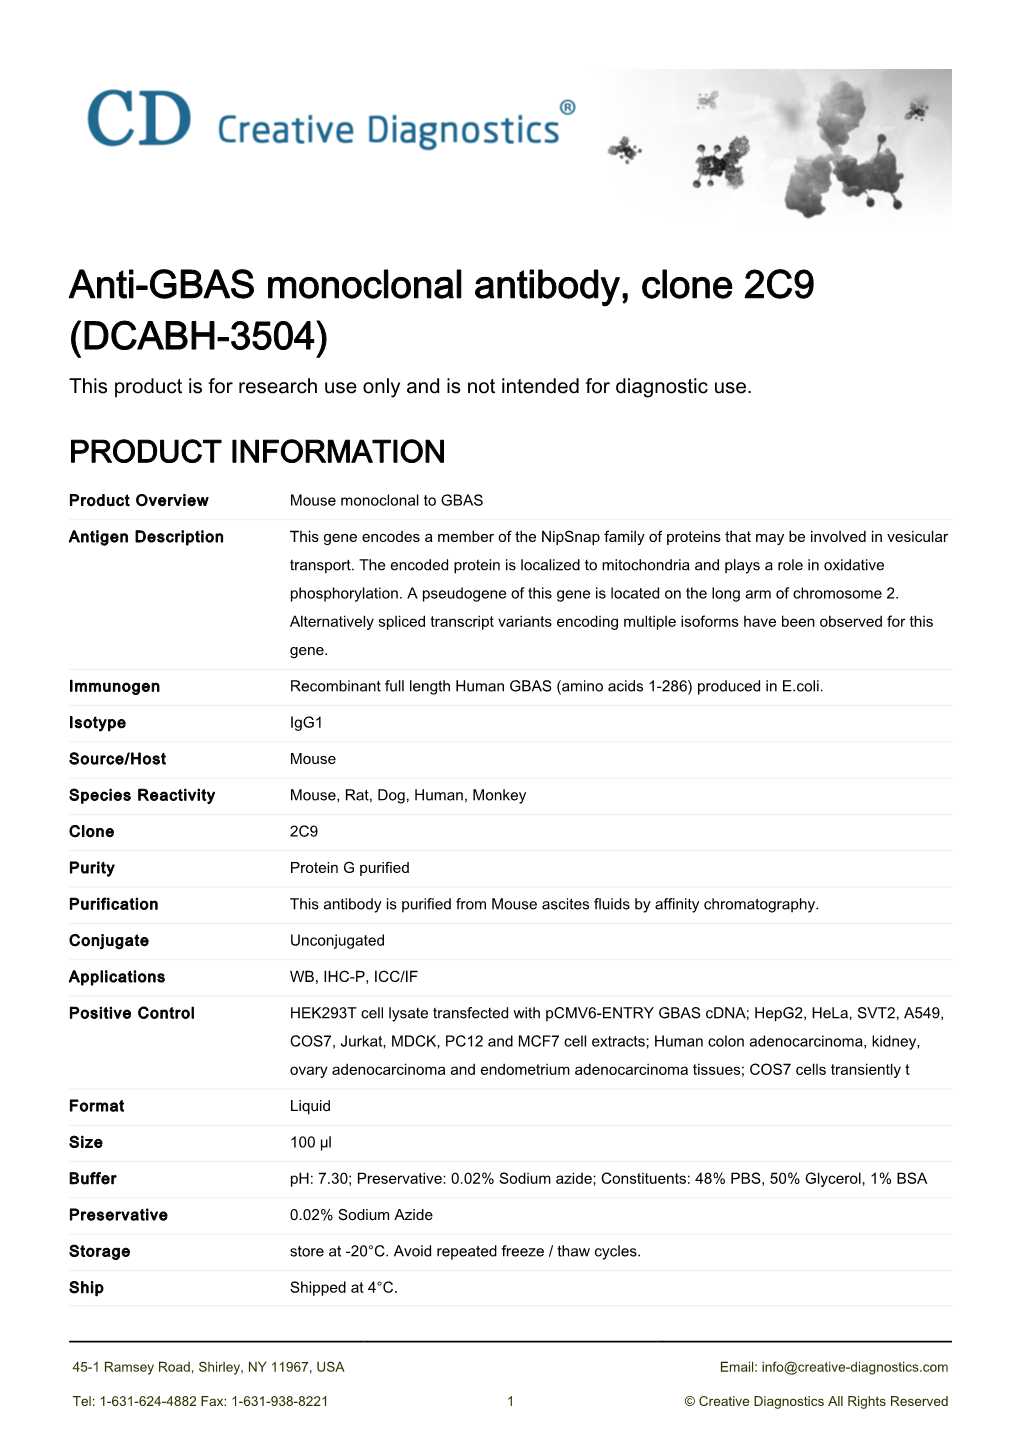 Anti-GBAS Monoclonal Antibody, Clone 2C9 (DCABH-3504) This Product Is for Research Use Only and Is Not Intended for Diagnostic Use